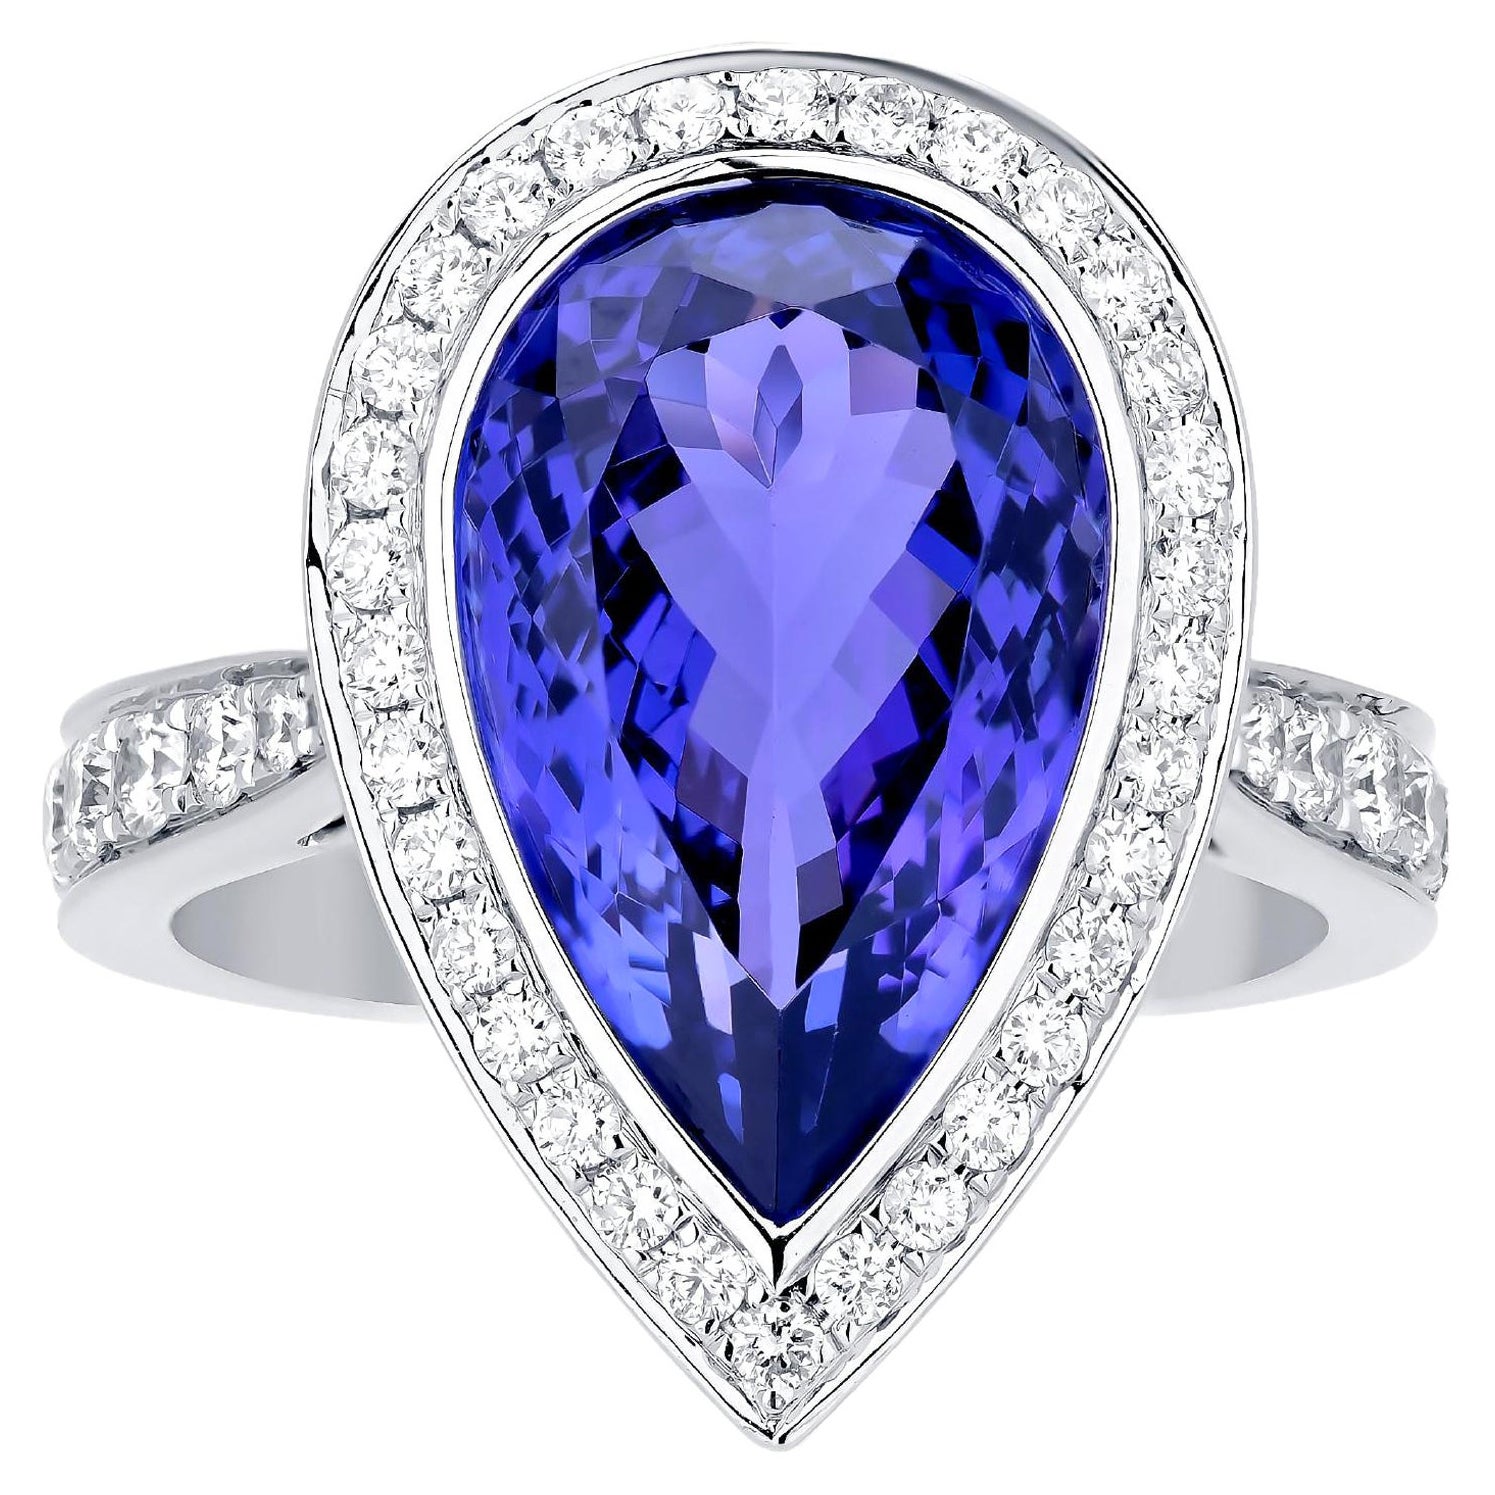 Nigaam 8.29cttw. Pear-Shaped Tanzanite and Diamond Halo Ring in 18k White Gold